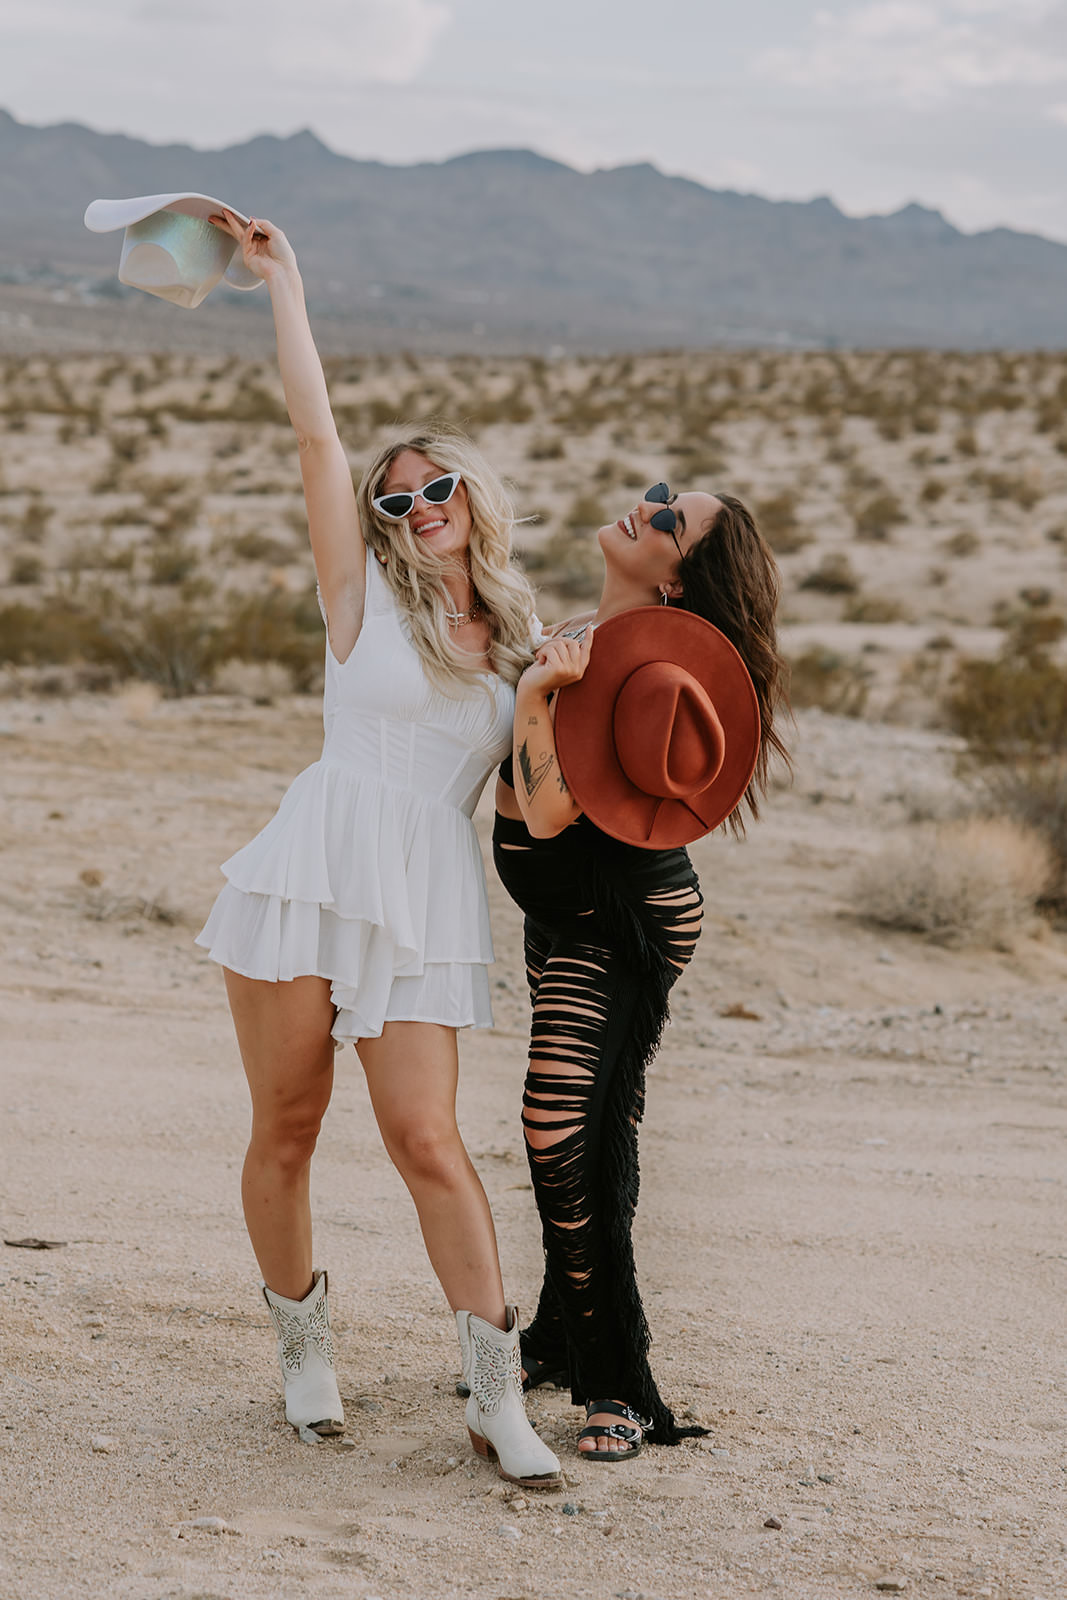 bride throwing cowboy hat in the air while posing with her bridesmaid in the desert during her bachelorette party